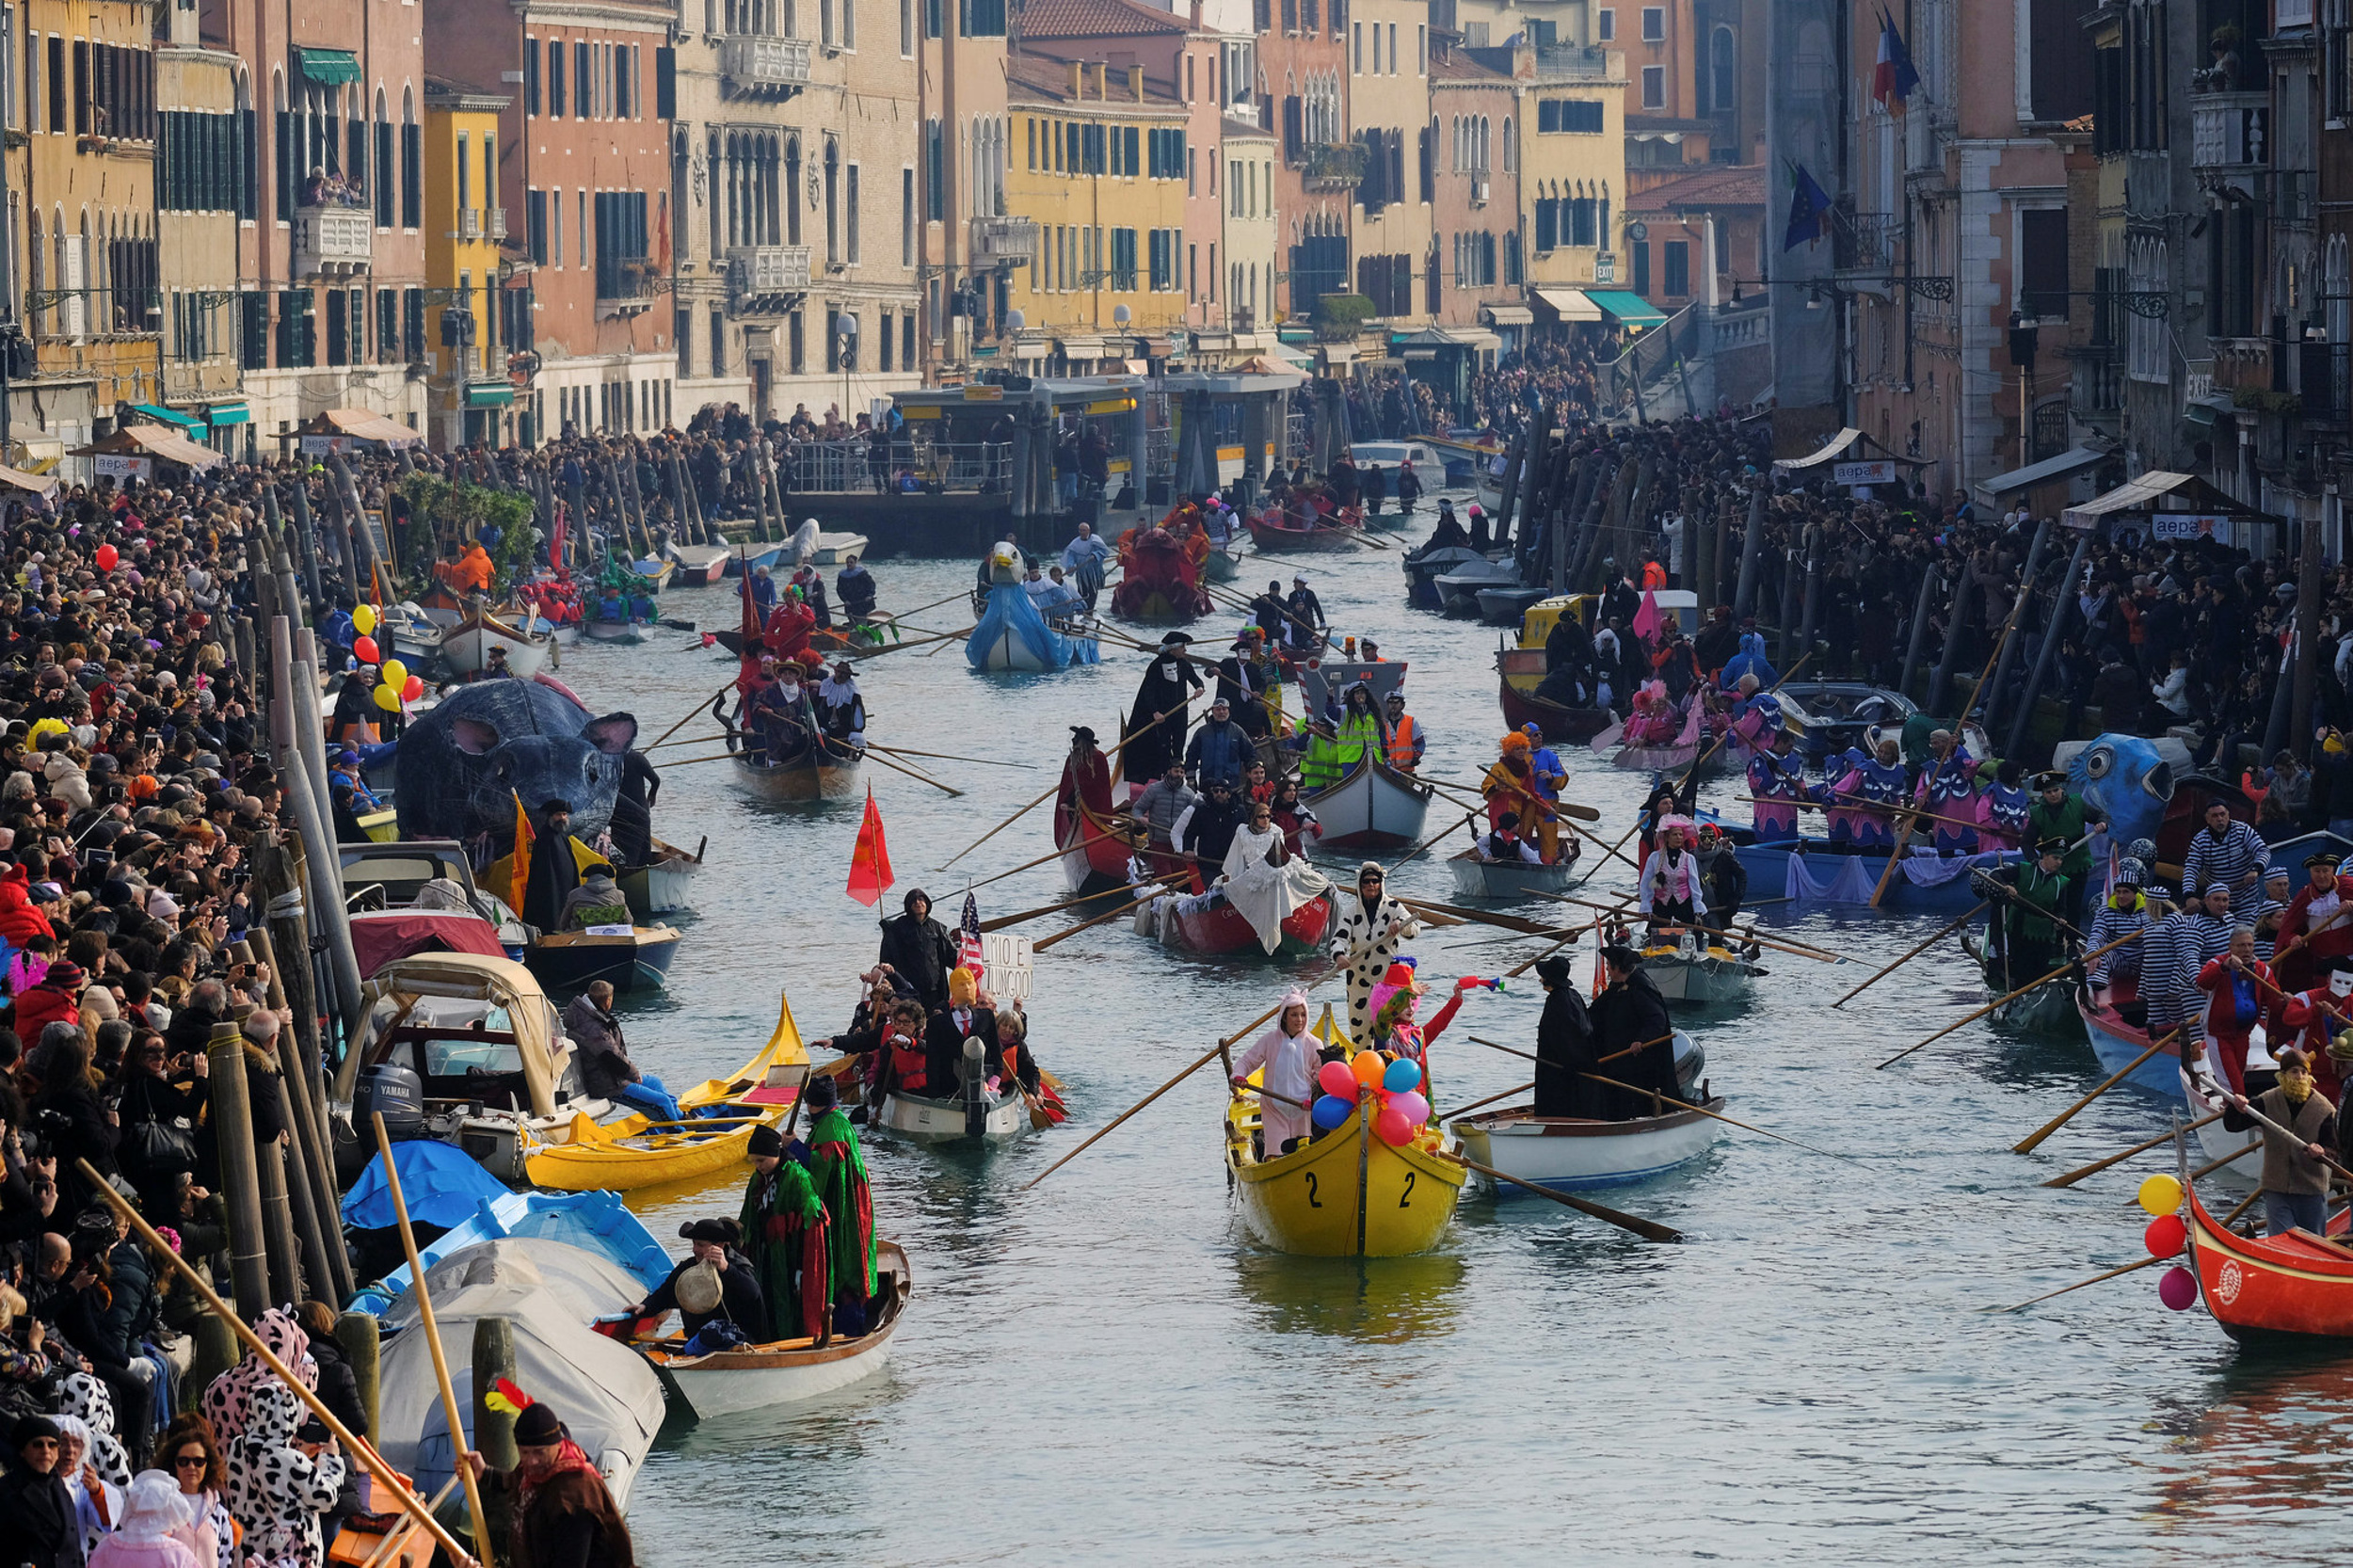 <p>Every February, the city hosts a carnival where three million people dress up in costumes and dance until dawn. It's the closest thing to Fellini-esque Venice has to offer. </p><p>You may also like: <a href='https://www.yardbarker.com/lifestyle/articles/25_quick_and_easy_game_day_appetizers_123123/s1__21746821'>25 quick and easy game day appetizers</a></p>